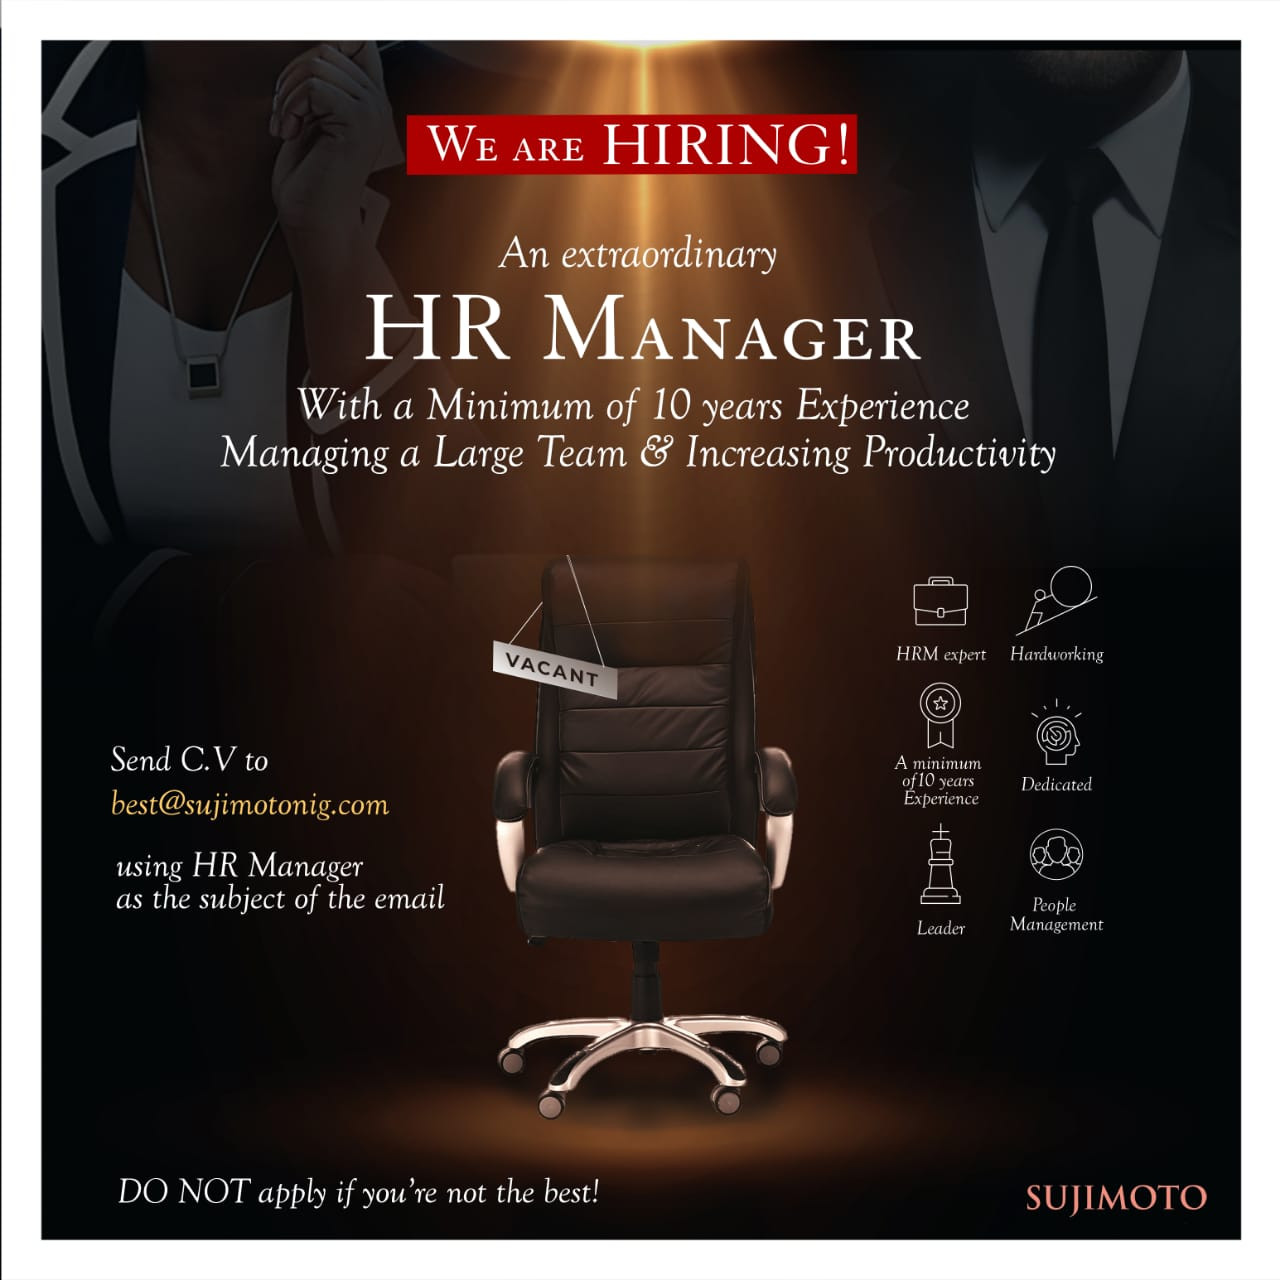 Join The Leagues Of The Best Minds - Sujimoto is hiring (HR Manager, Logistics Manager, Facility Manager, Internal Auditor)